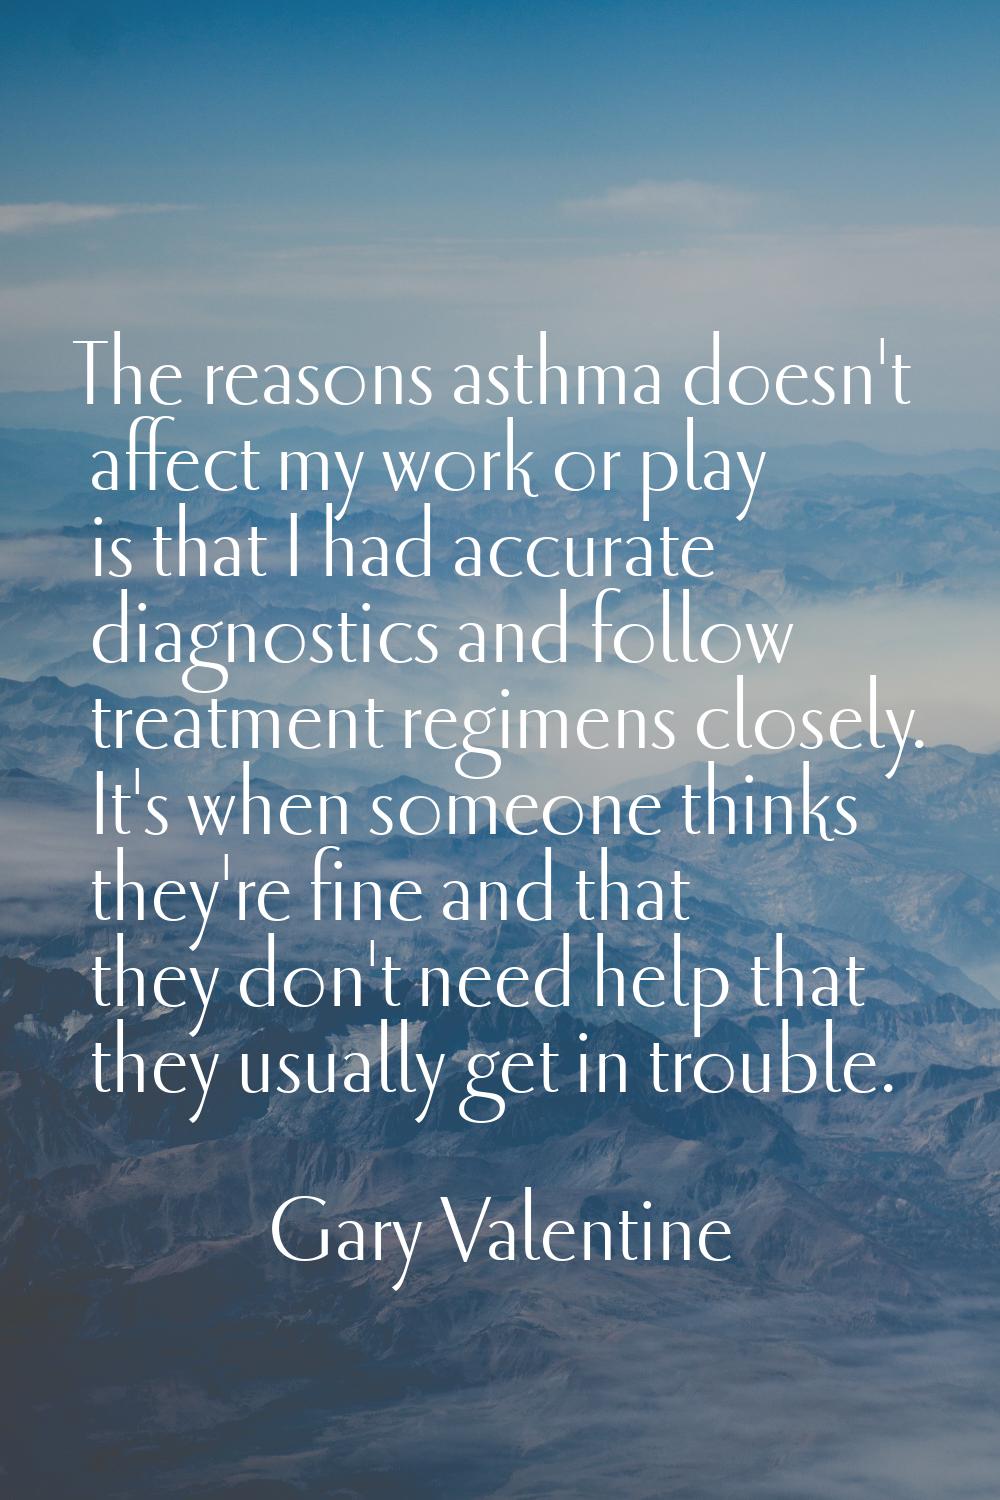 The reasons asthma doesn't affect my work or play is that I had accurate diagnostics and follow tre